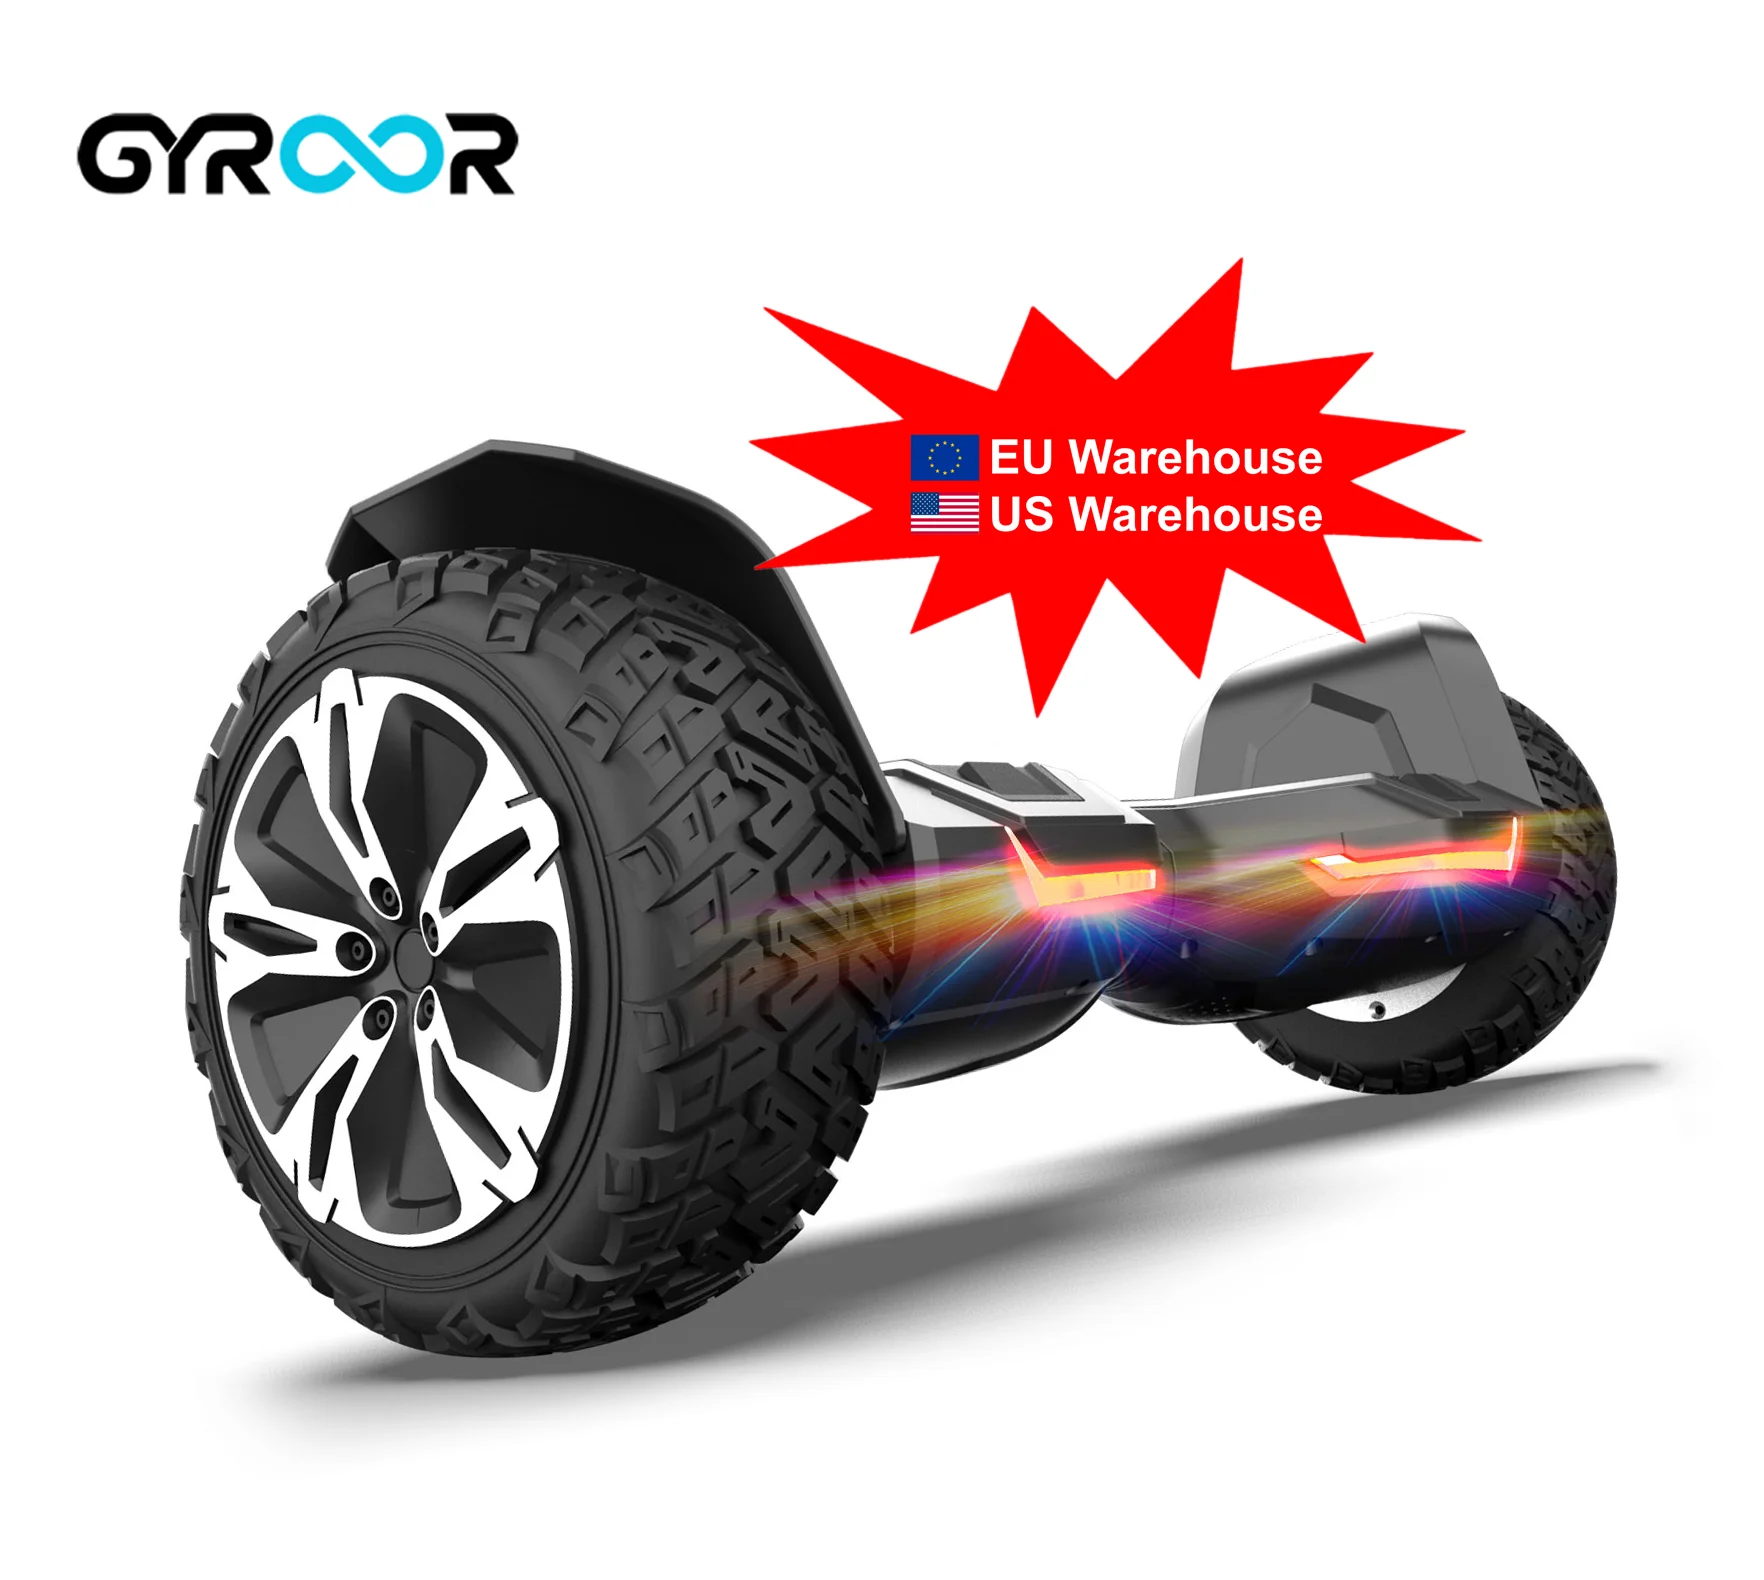 

Gyroor Hoverboard In Europe Warehouse Cheap 8.5 Inch hover hoverboard With CE Certificate, Black/red/blue